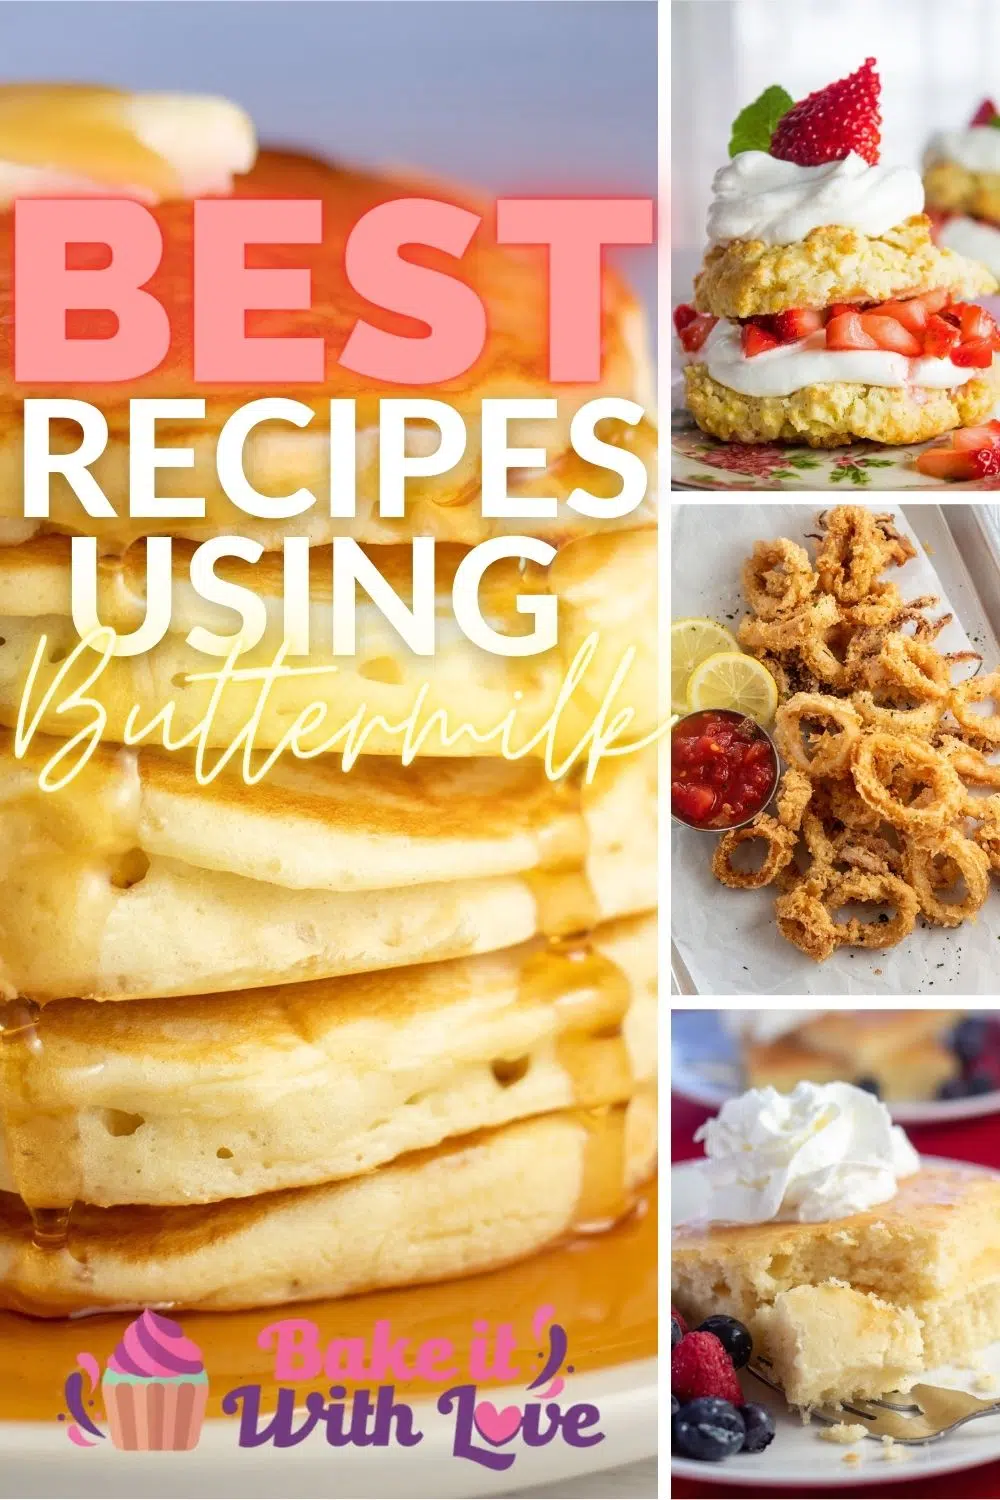 Best buttermilk recipes pin featuring 4 recipe images and text heading.